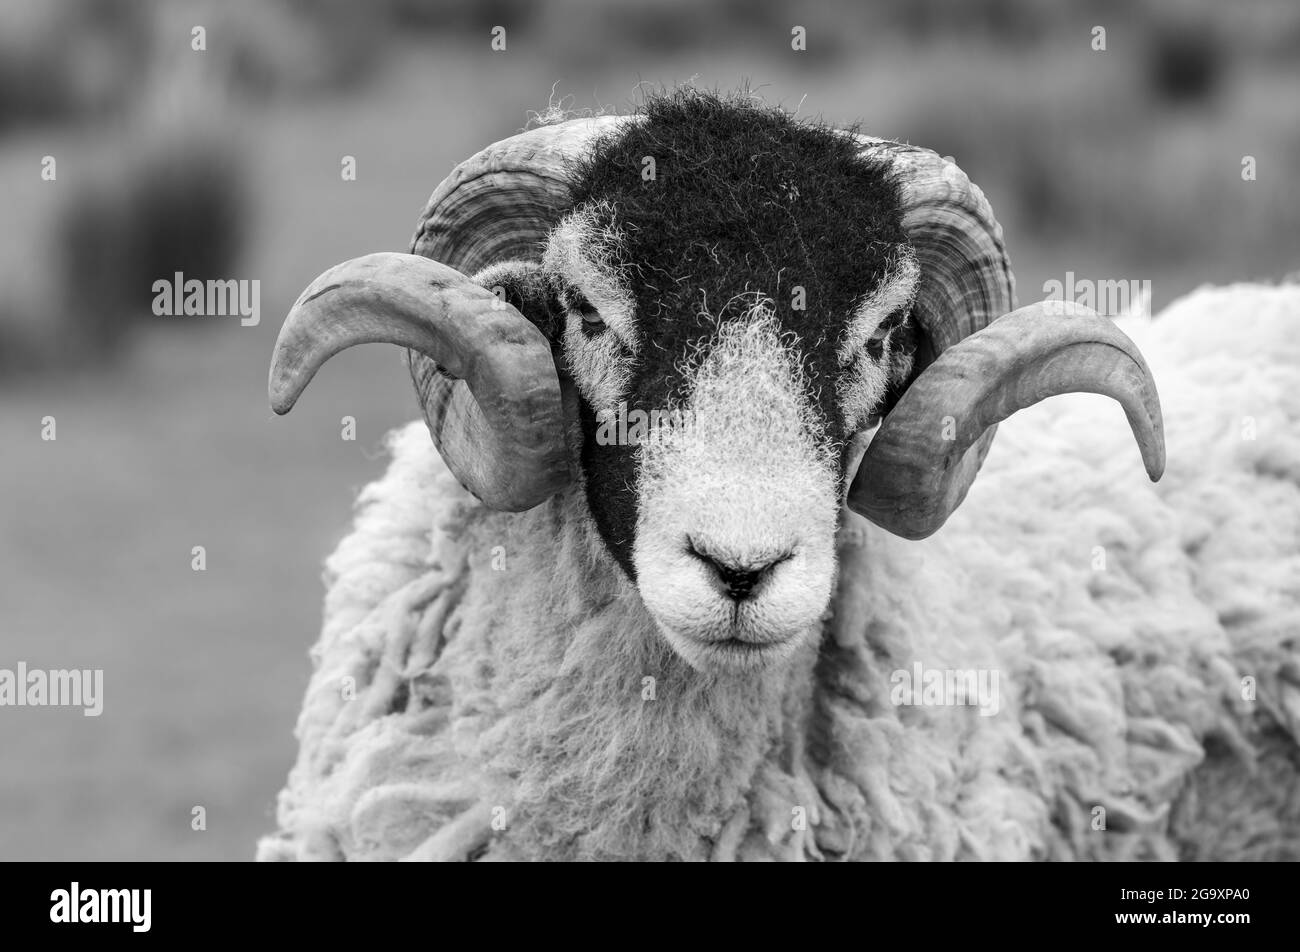 Sell ram Black and White Stock Photos & Images - Alamy